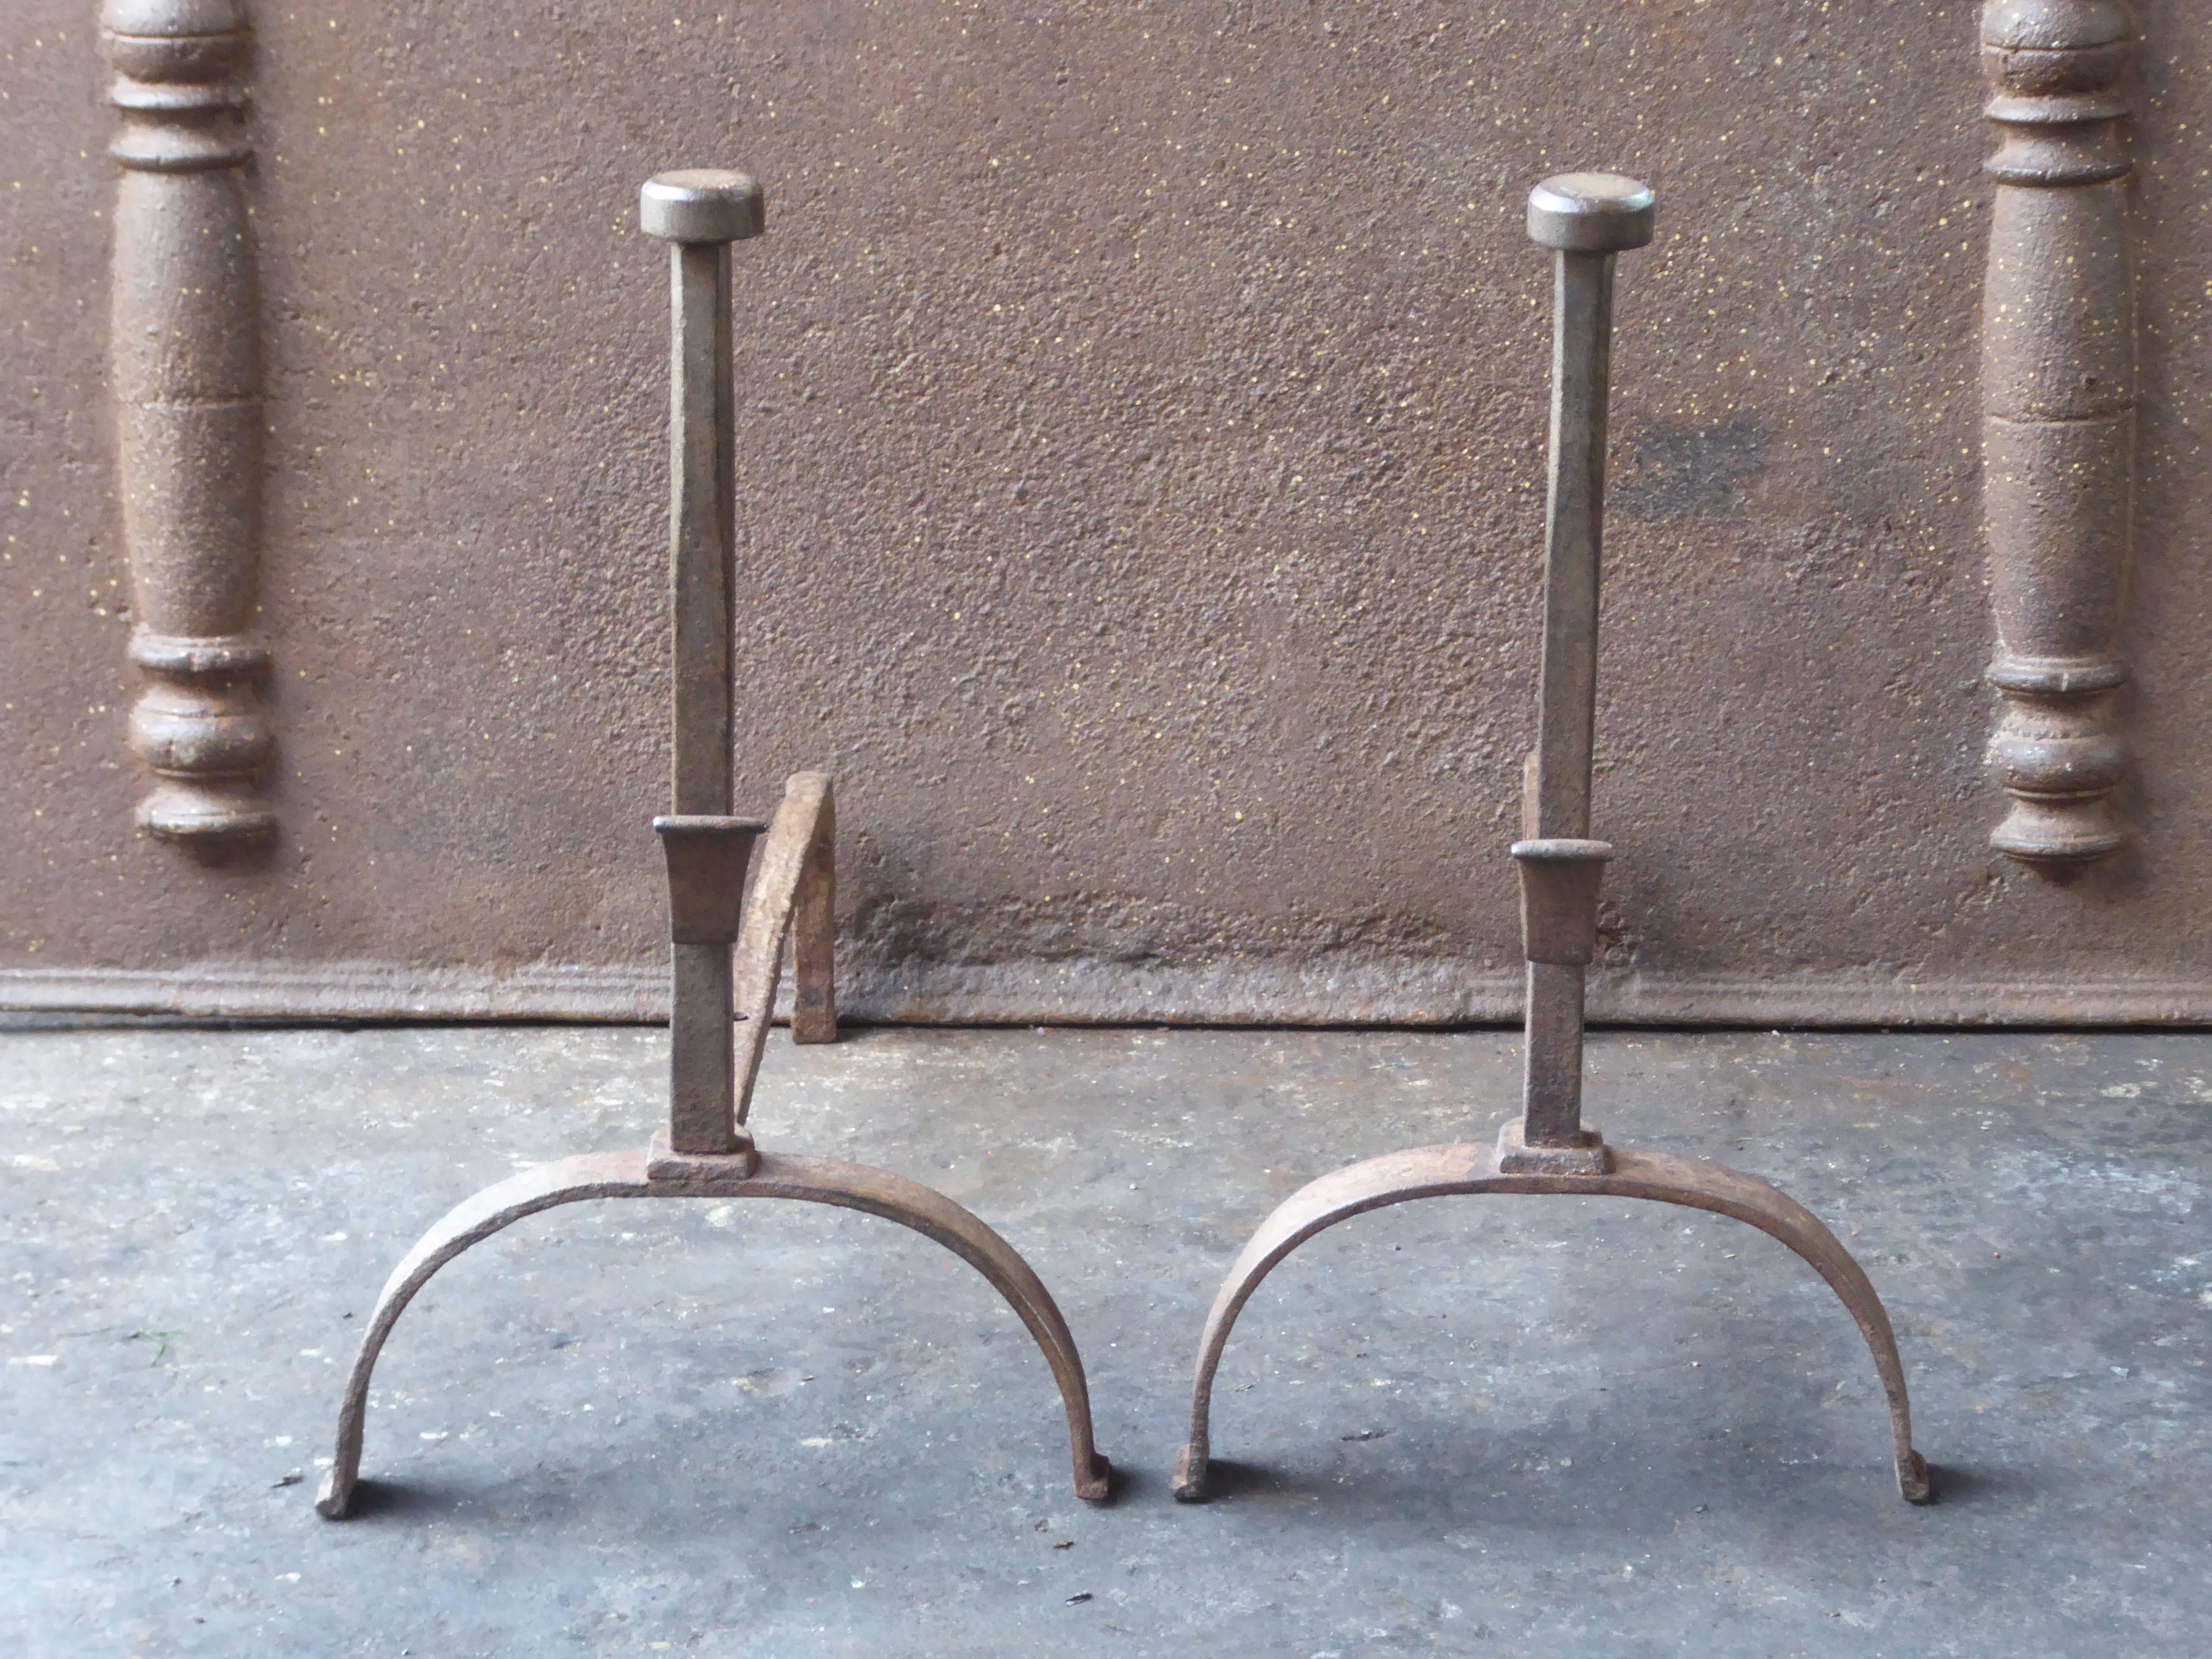 19th century French andirons made of wrought iron. Napoleon III period. The condition is good.

